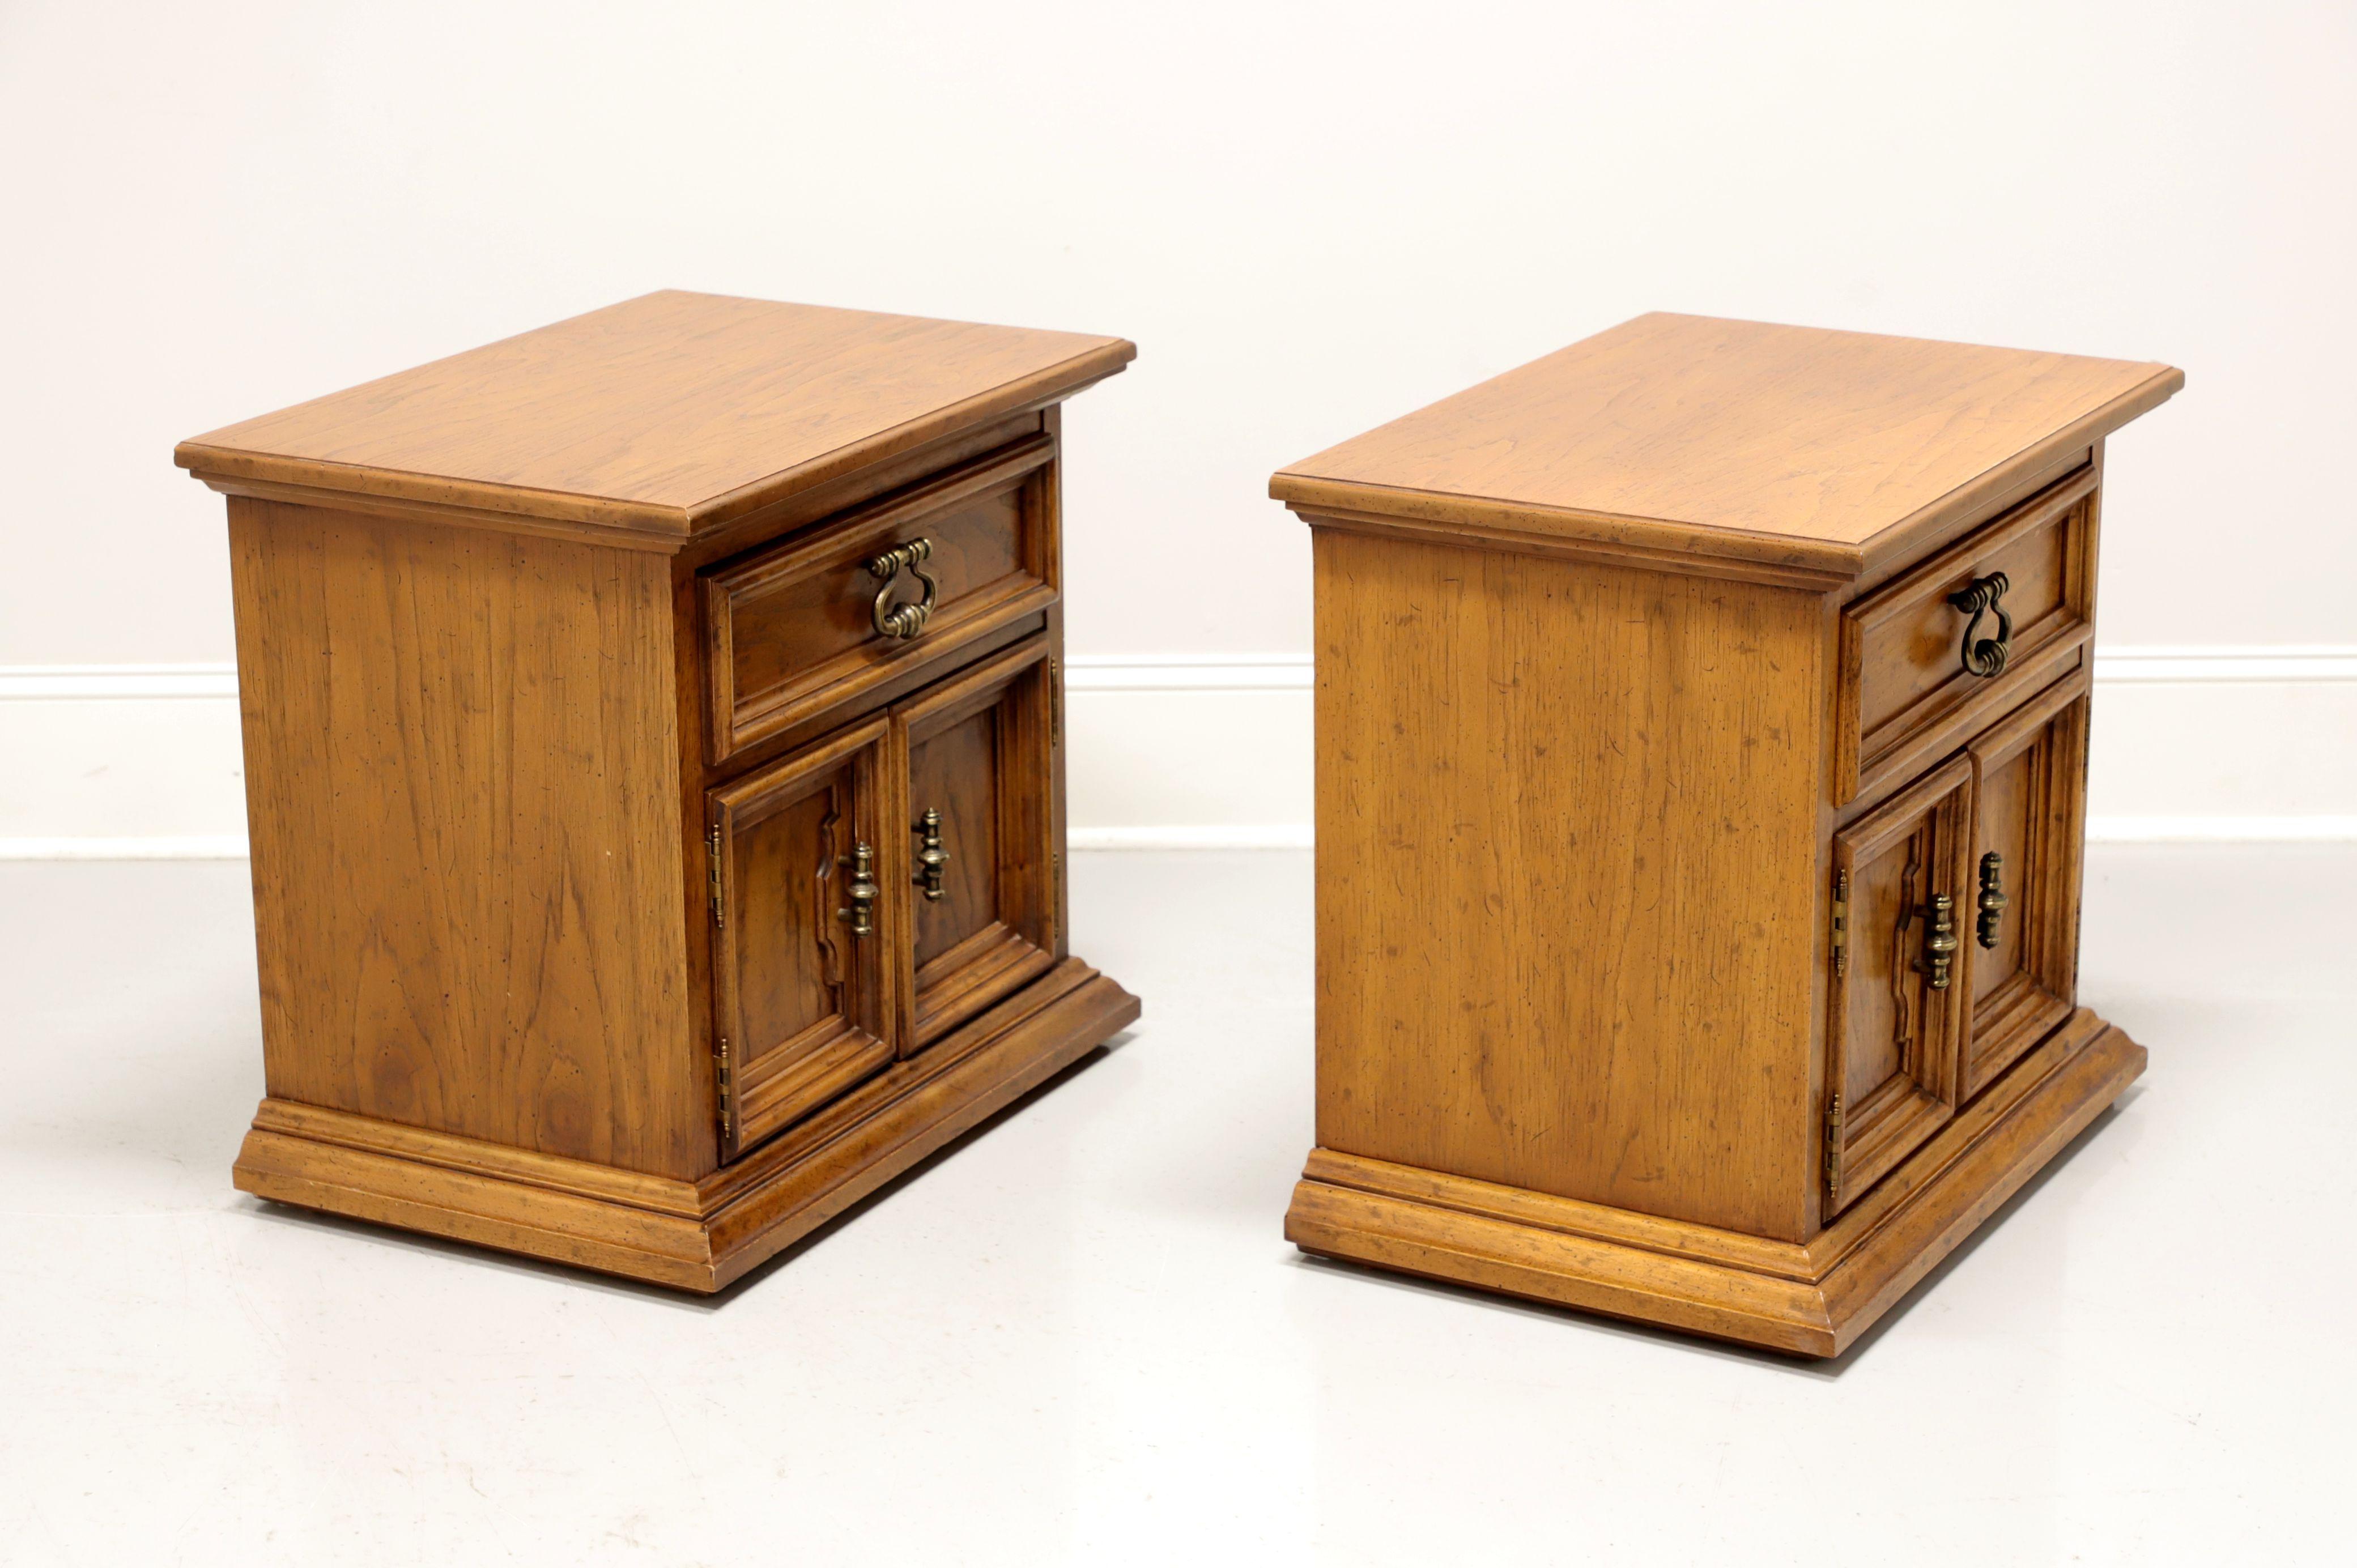 A pair of Spanish style nightstands by Drexel, from their Velero Collection. Pecan with a distressed finish and brass hardware. Features one drawer of dovetail construction over a two door cabinet revealing a storage area. Made in North Carolina,